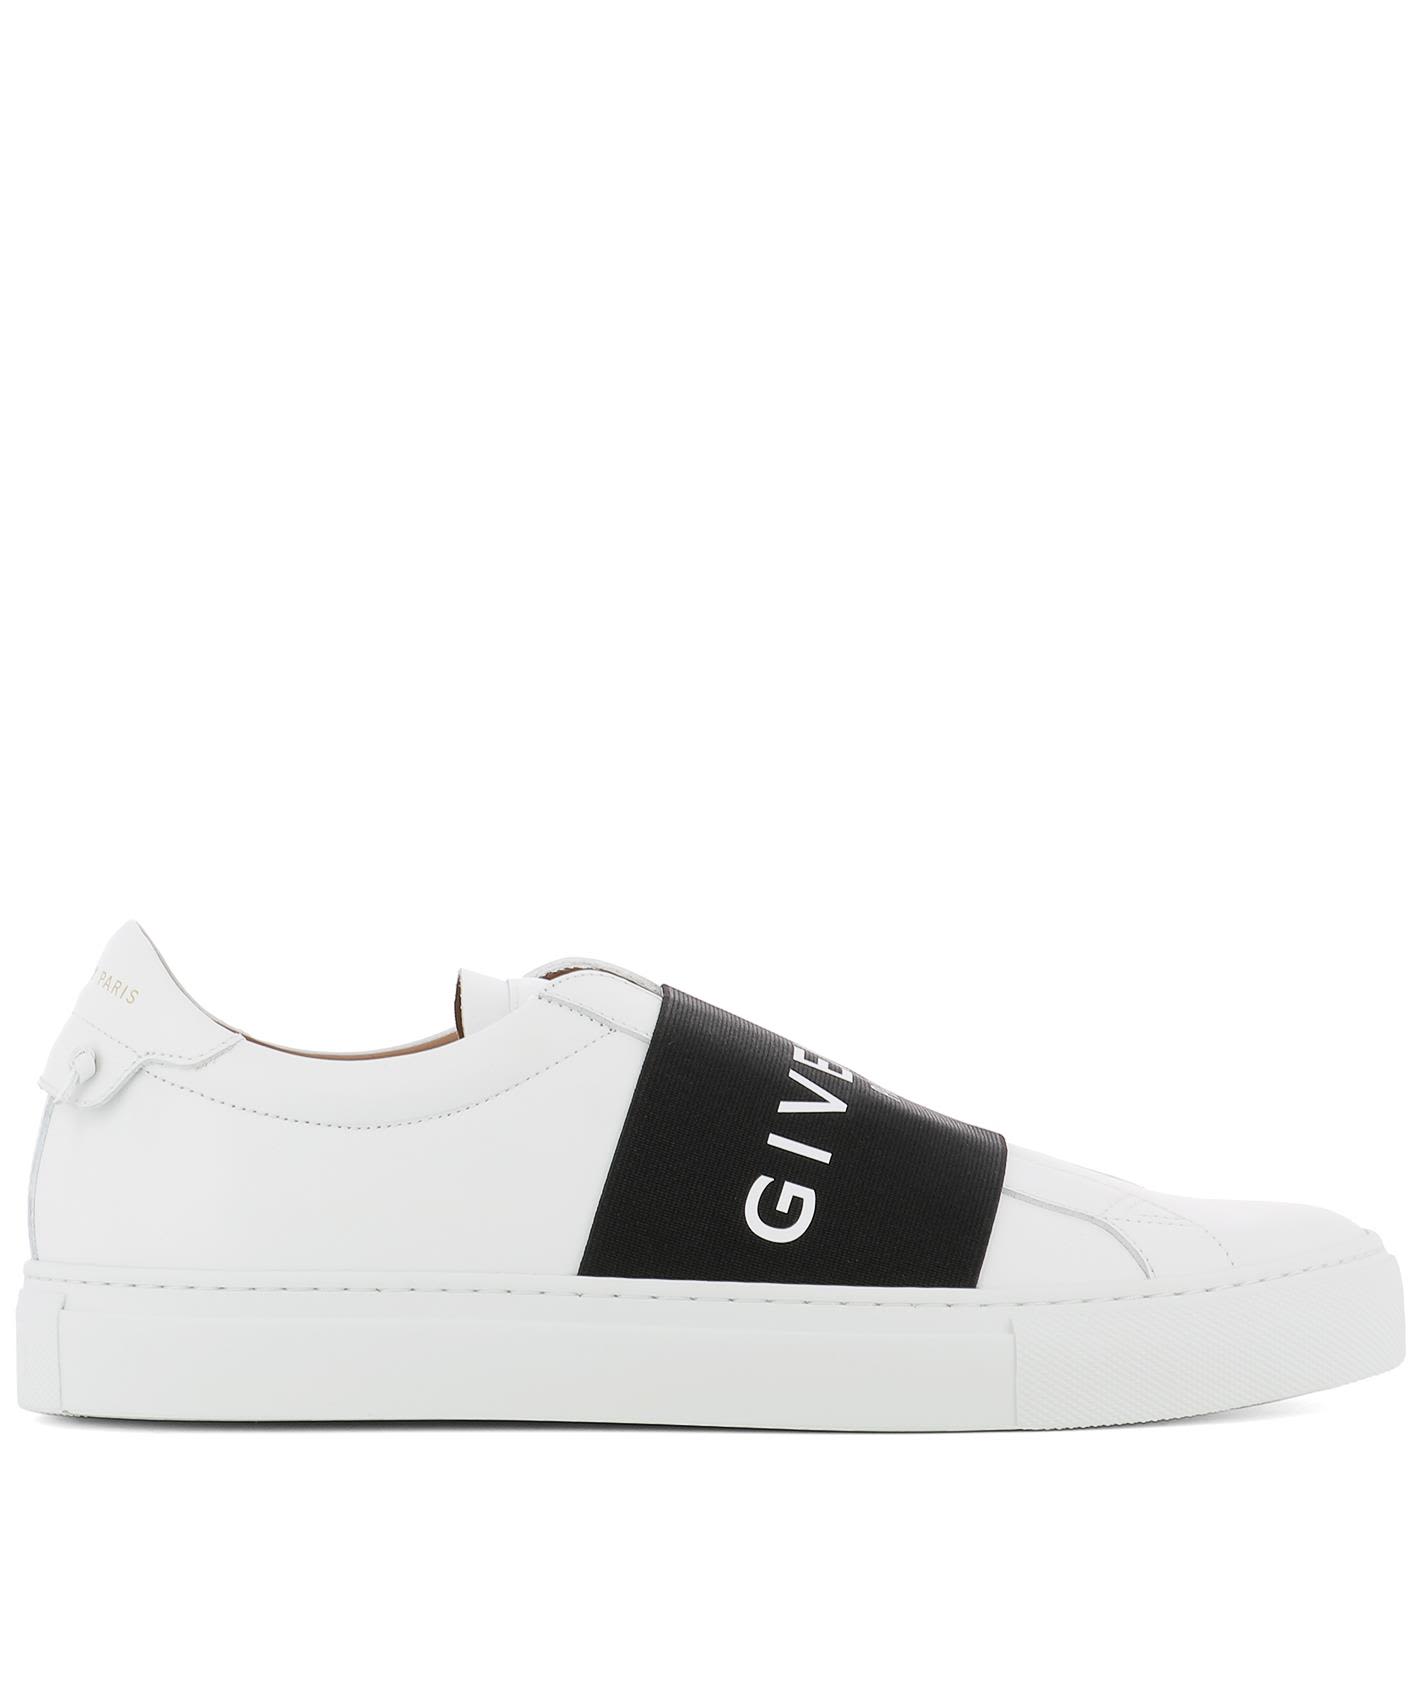 GIVENCHY WHITE LEATHER URBAN STREET SNEAKERS SLIP-ON,10611487